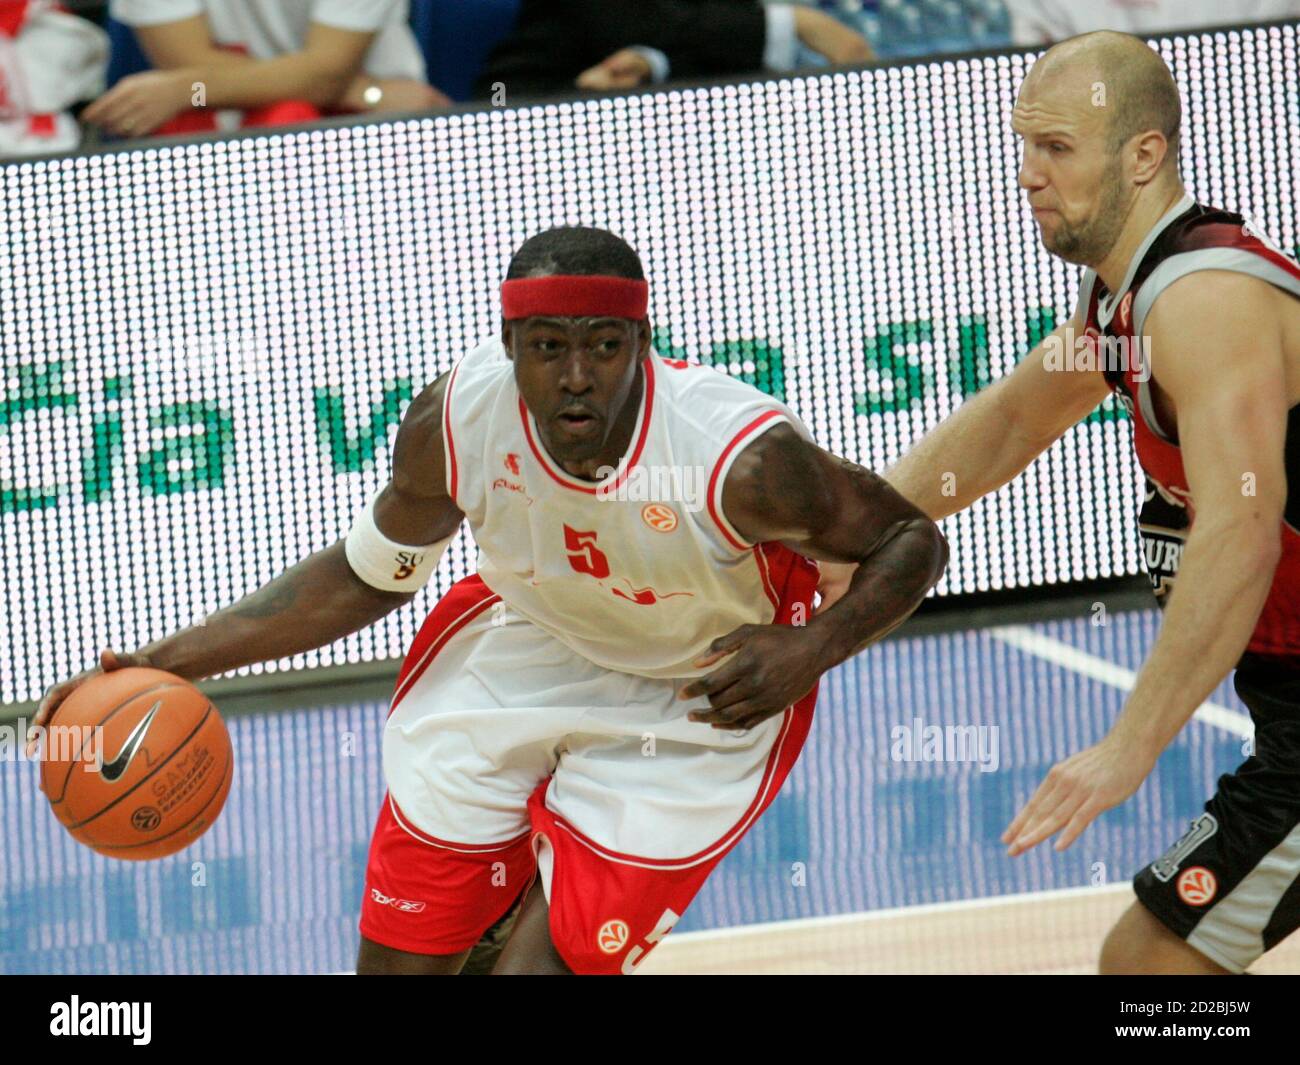 Ansu Sesay (L) of Armani Jeans Milano dribbles past Kenan Bajramovic of  Lietuvos Rytas during their Euroleague Group B men's basketball game in  Vilnius December 12, 2007. REUTERS/Ints Kalnins(LITHUANIA Stock Photo -